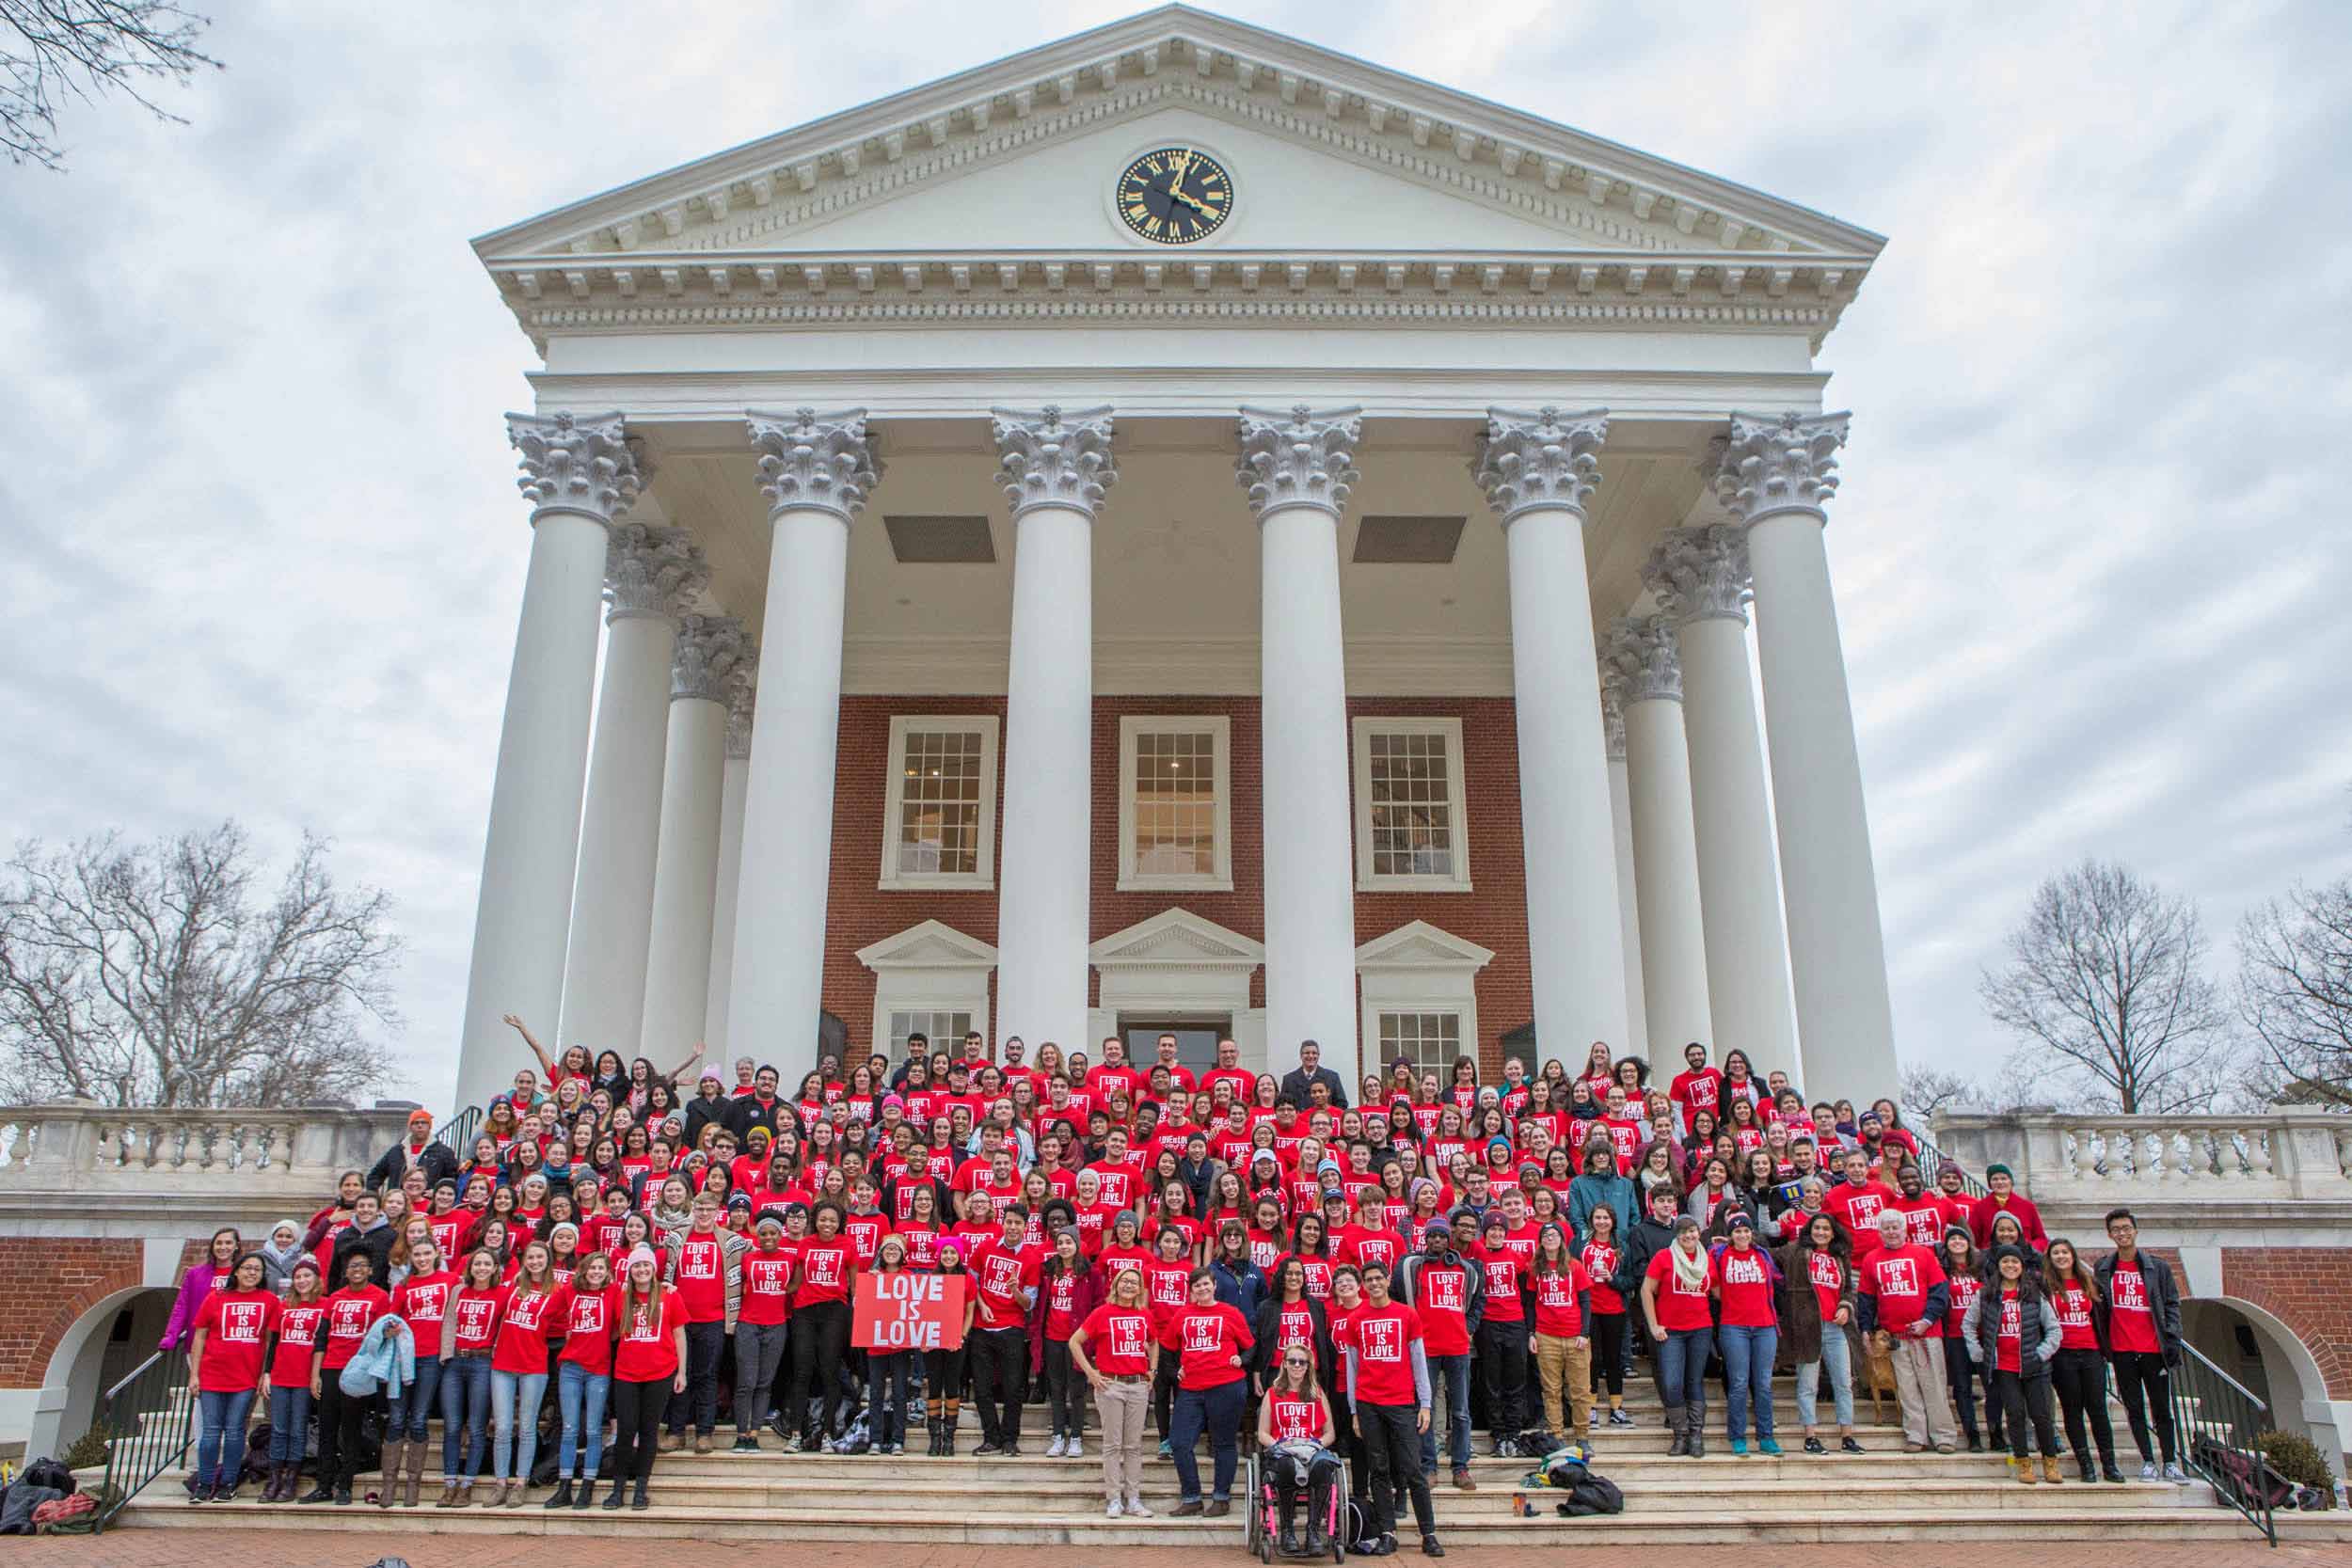 Aaron Laushway with many students, faculty, and staff out side the Rotunda wearing red “Love is Love” shirts